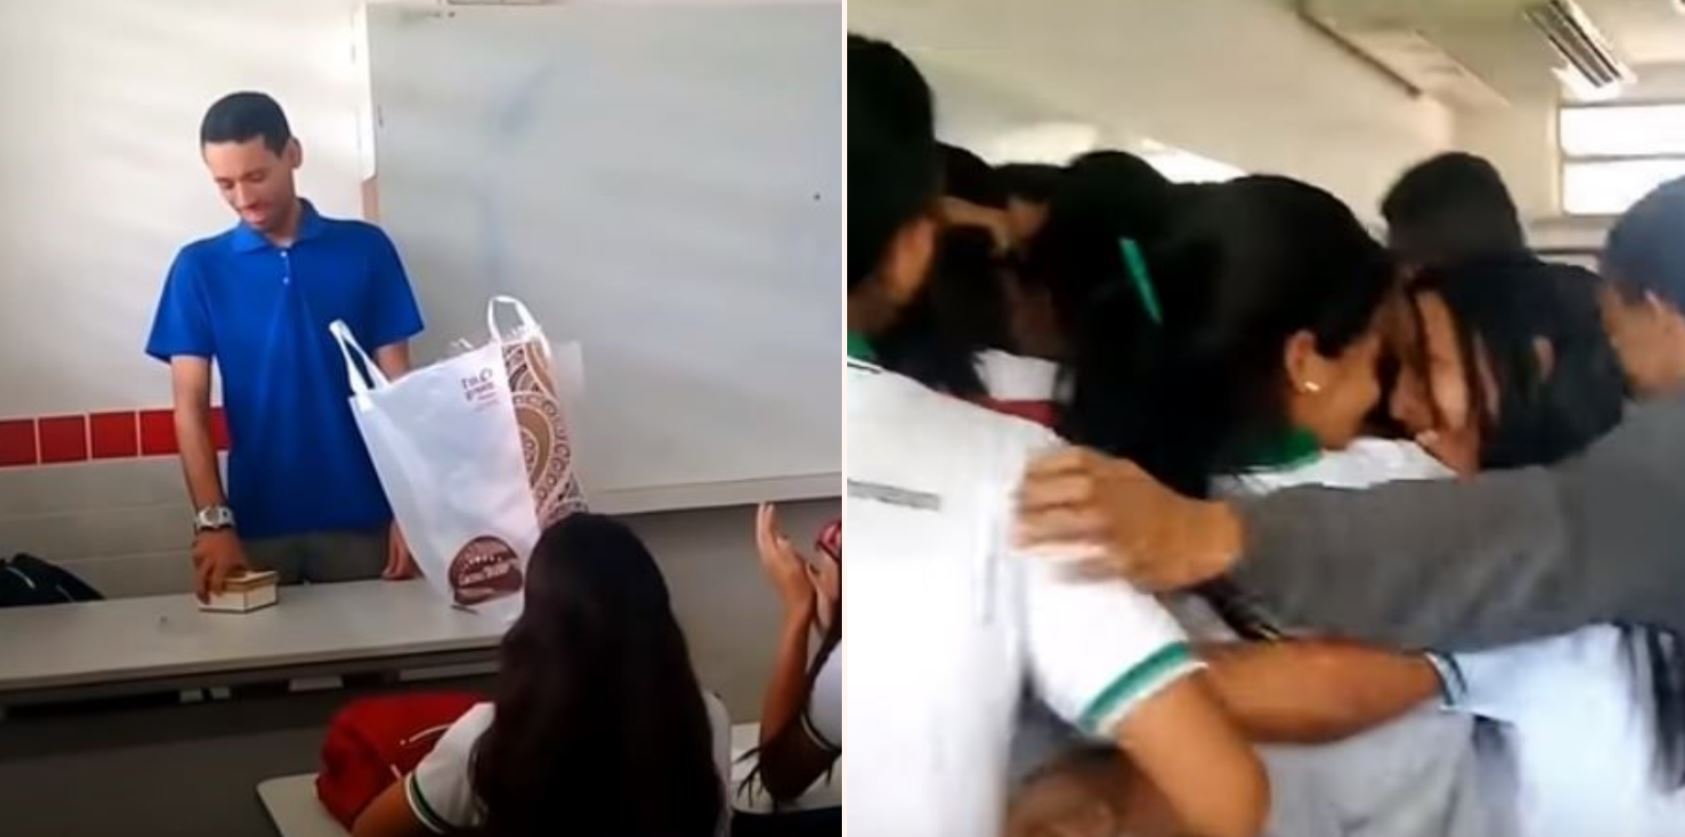 Students surprise broke as f**k teacher who’s been sleeping in his classroom